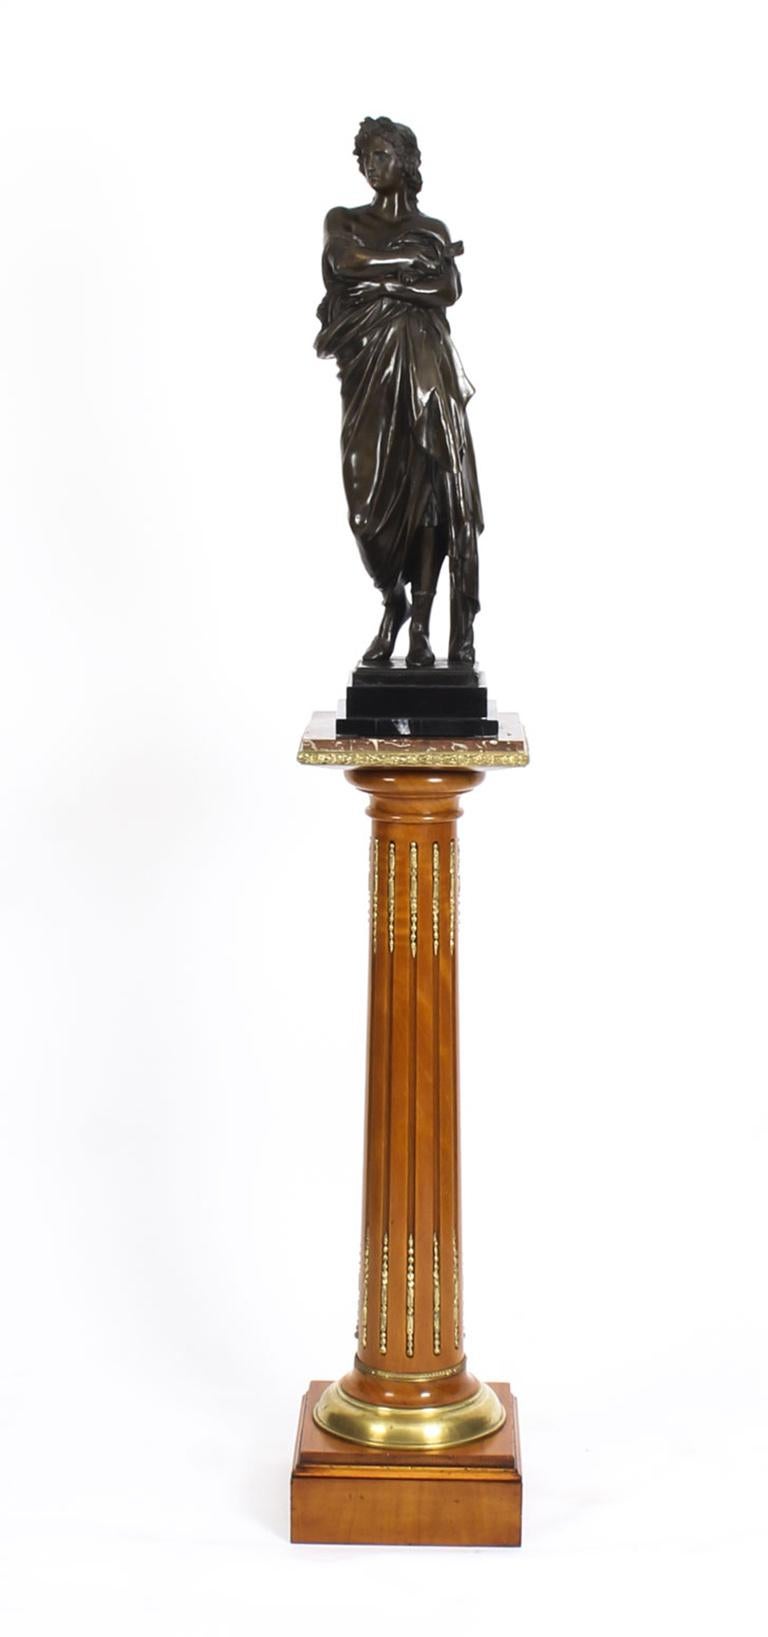 A fine antique French fruitwood and ormolu-mounted freestanding pedestal, circa 1860 in date.

The 